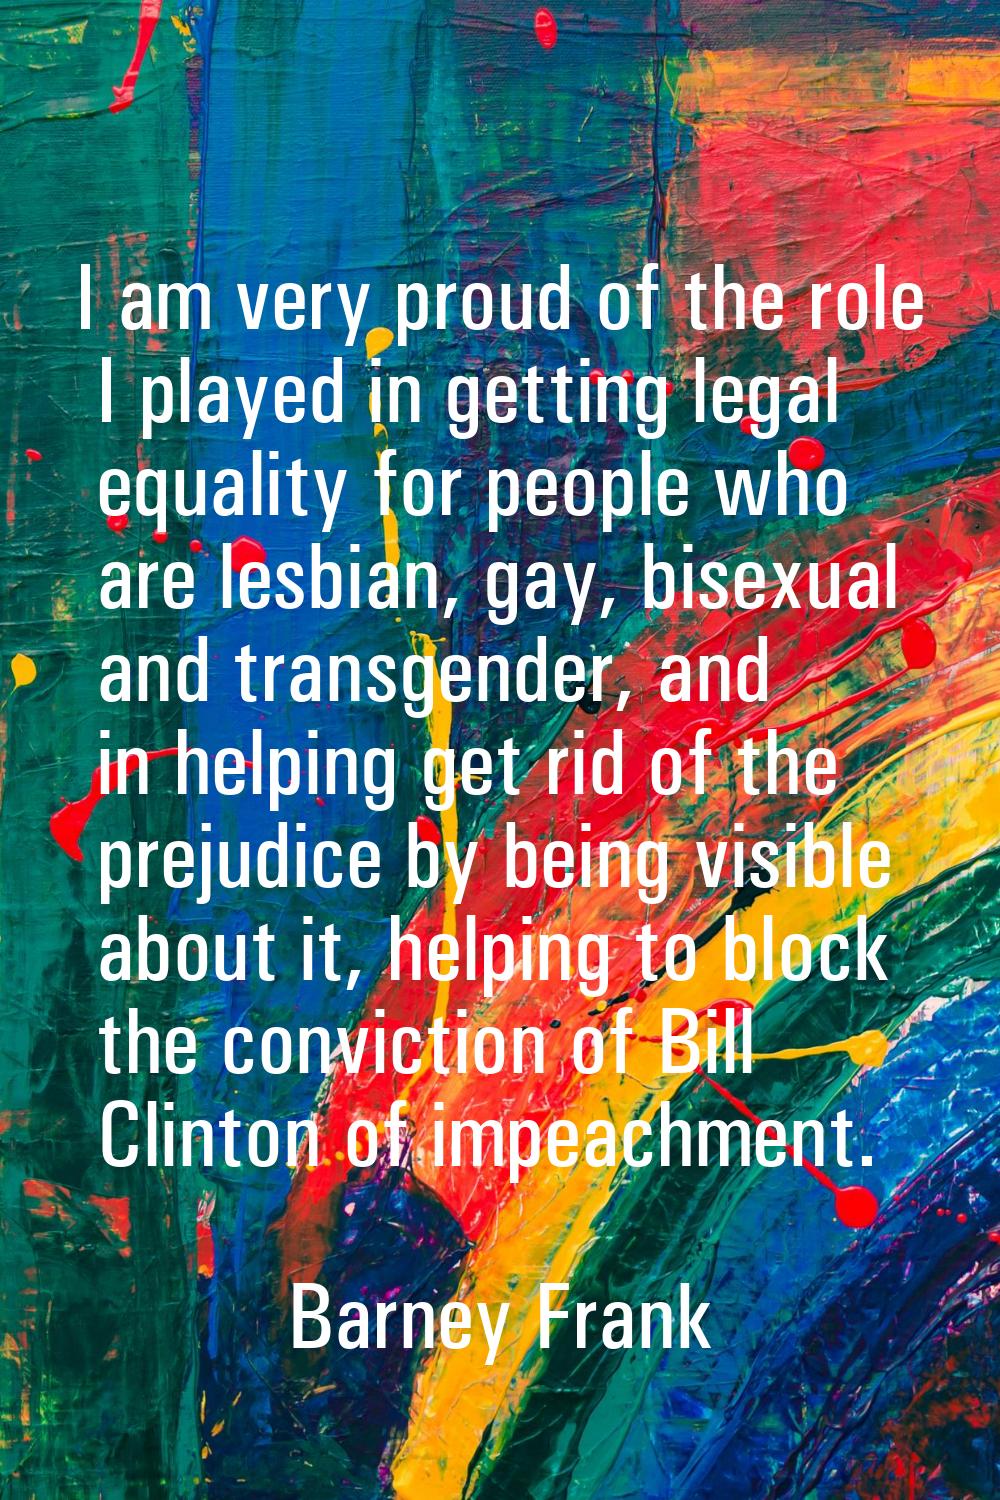 I am very proud of the role I played in getting legal equality for people who are lesbian, gay, bis